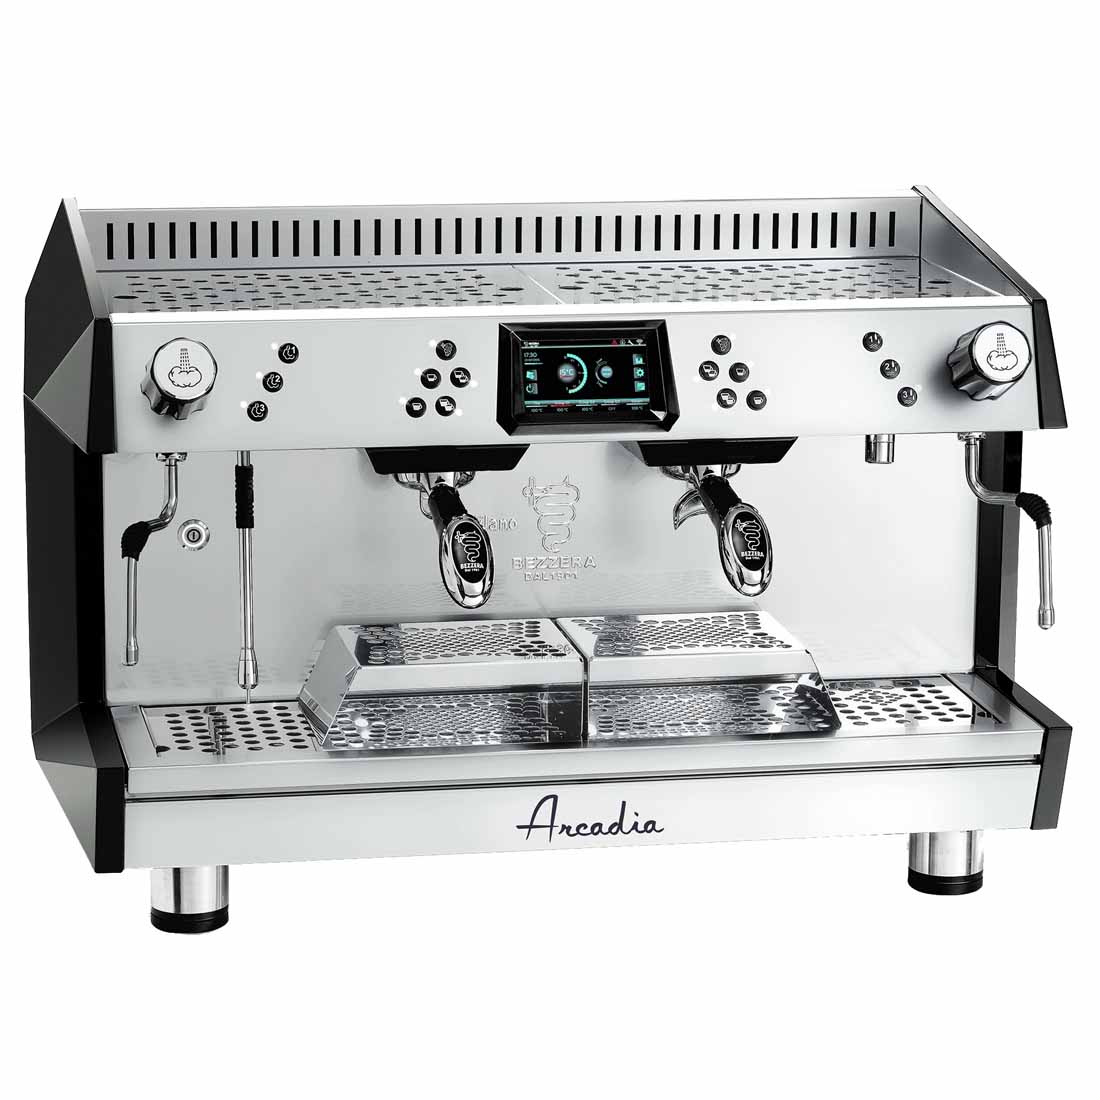 Bezzera Arcadia Professional Espresso Coffee Machine Ss 2 Group Pid With Display - ARCADIA-G2DP Commercial Coffee machines